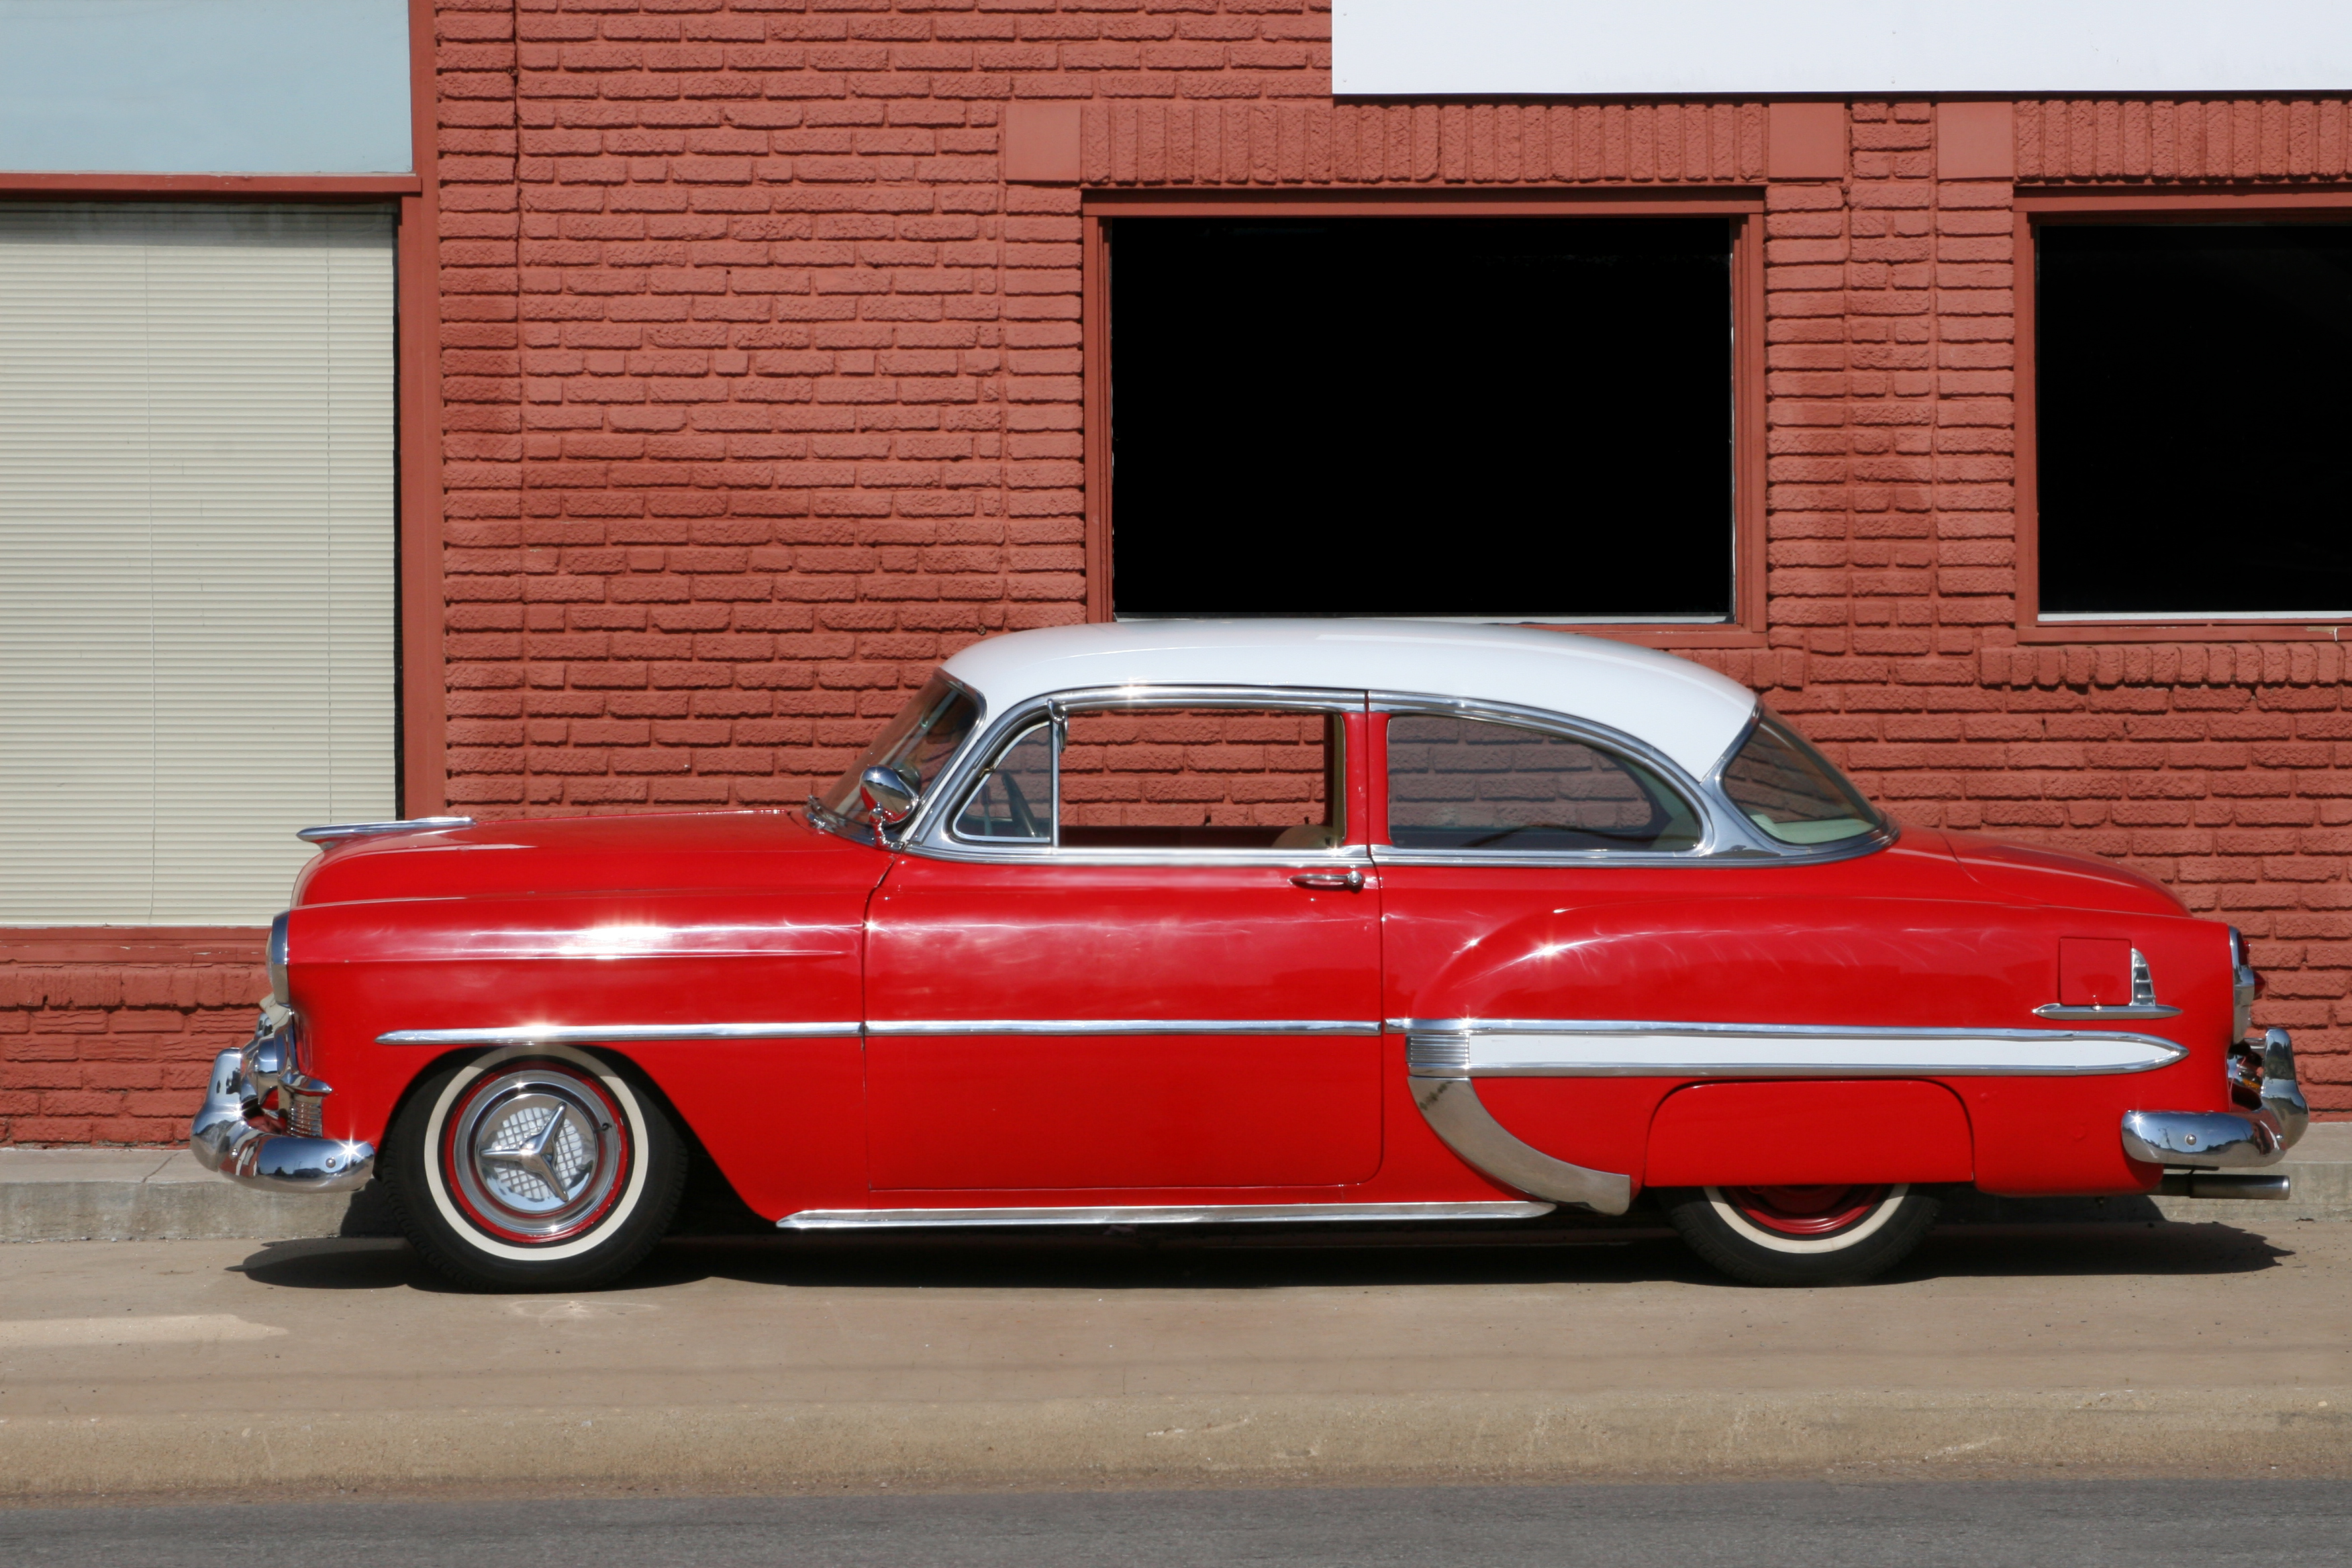 A red Chevy Bel Air | Source: Getty Images